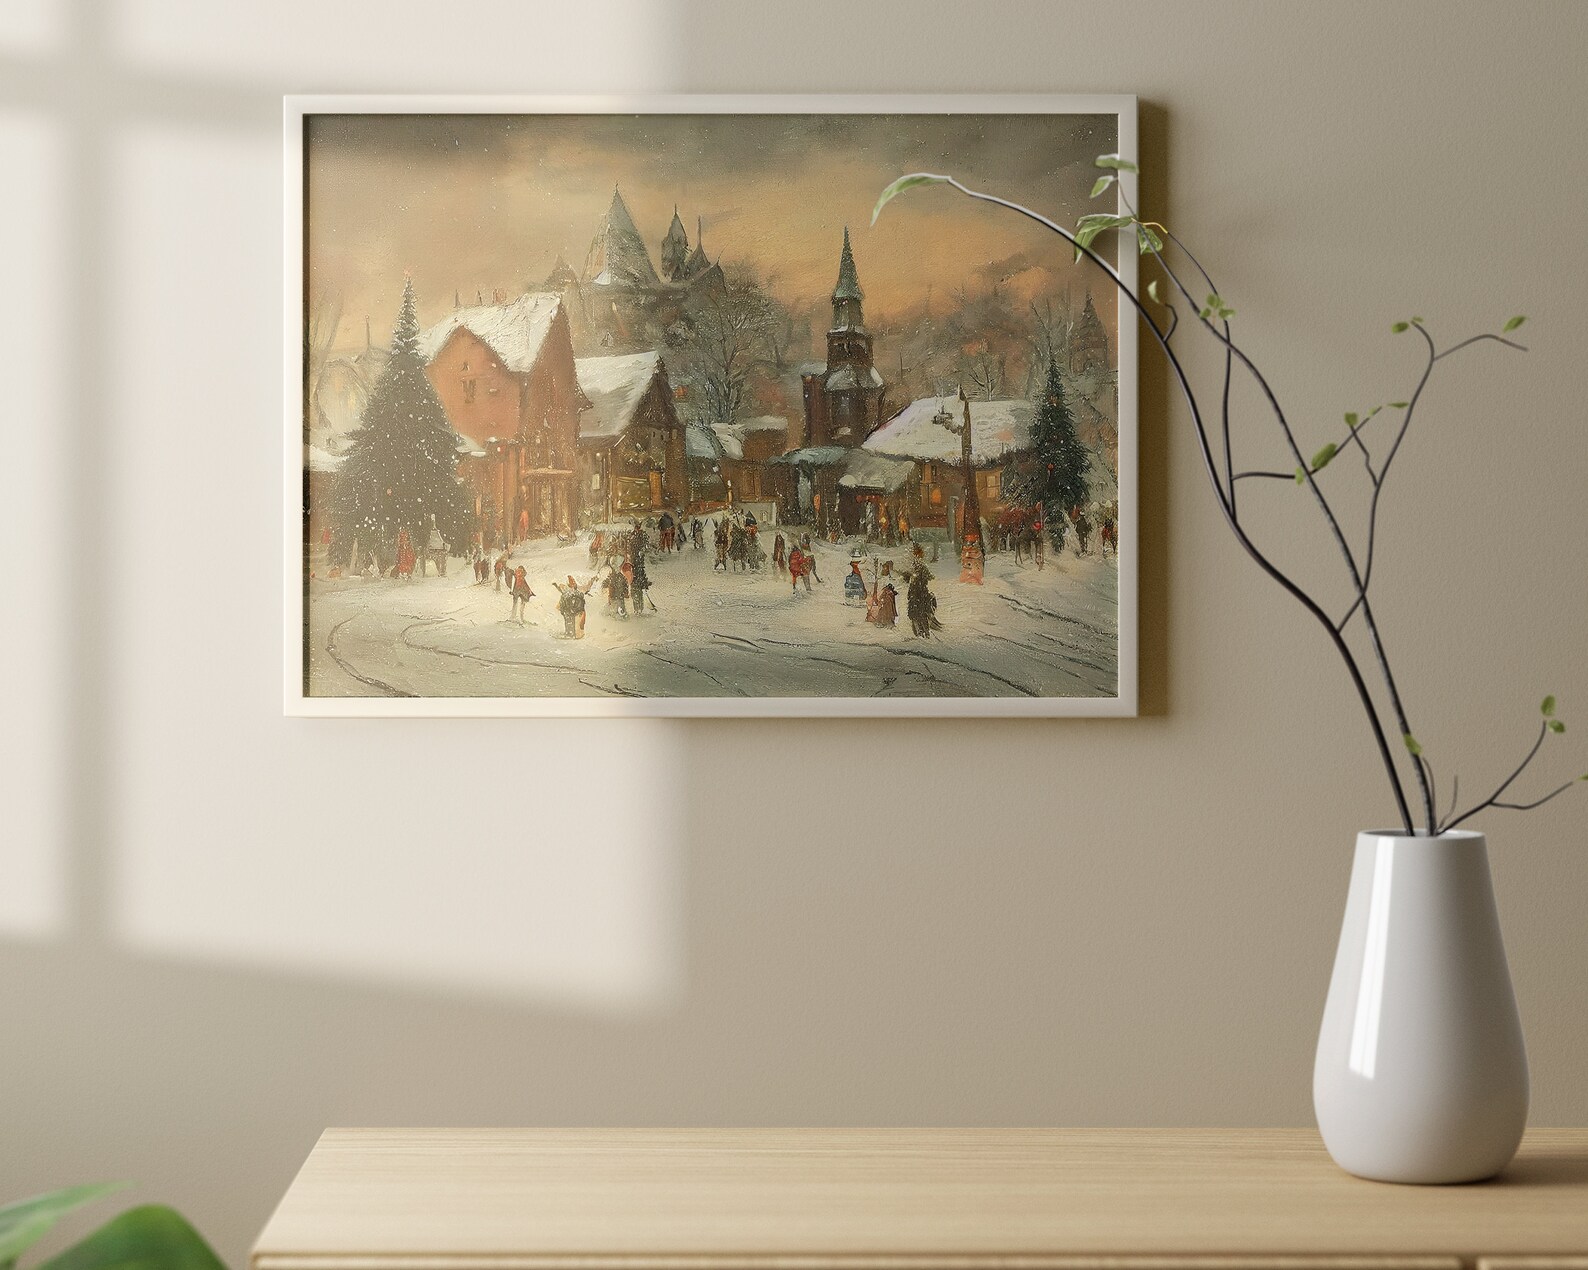 Vintage Winter Village / Christmas Winter Art / Country Snow - Etsy